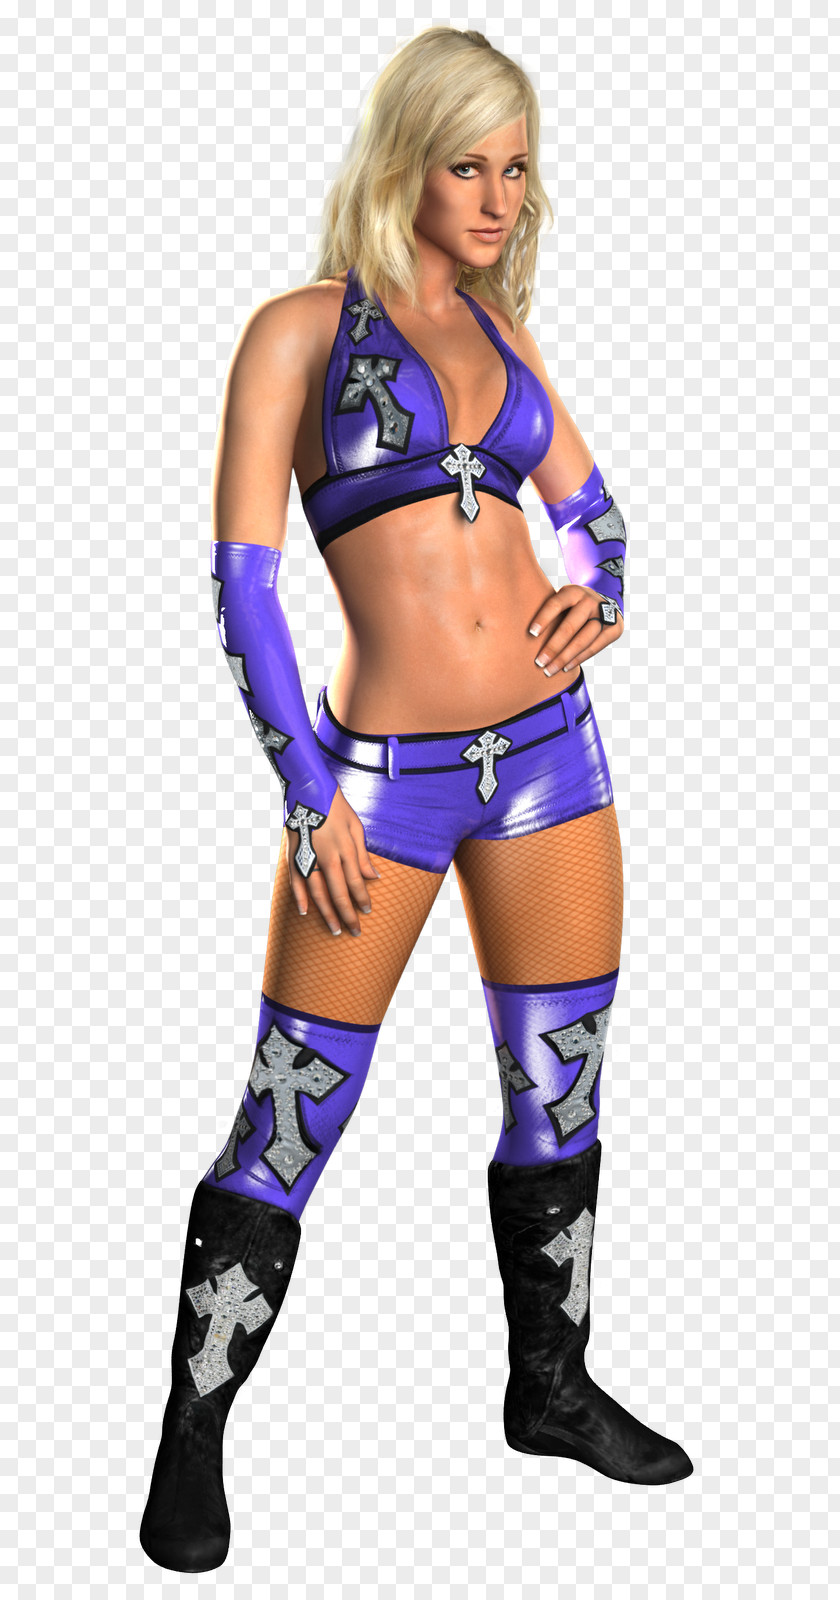 Michelle McCool WWE SmackDown Vs. Raw 2011 '12 2K17 PNG vs. 2K17, the undertaker clipart PNG